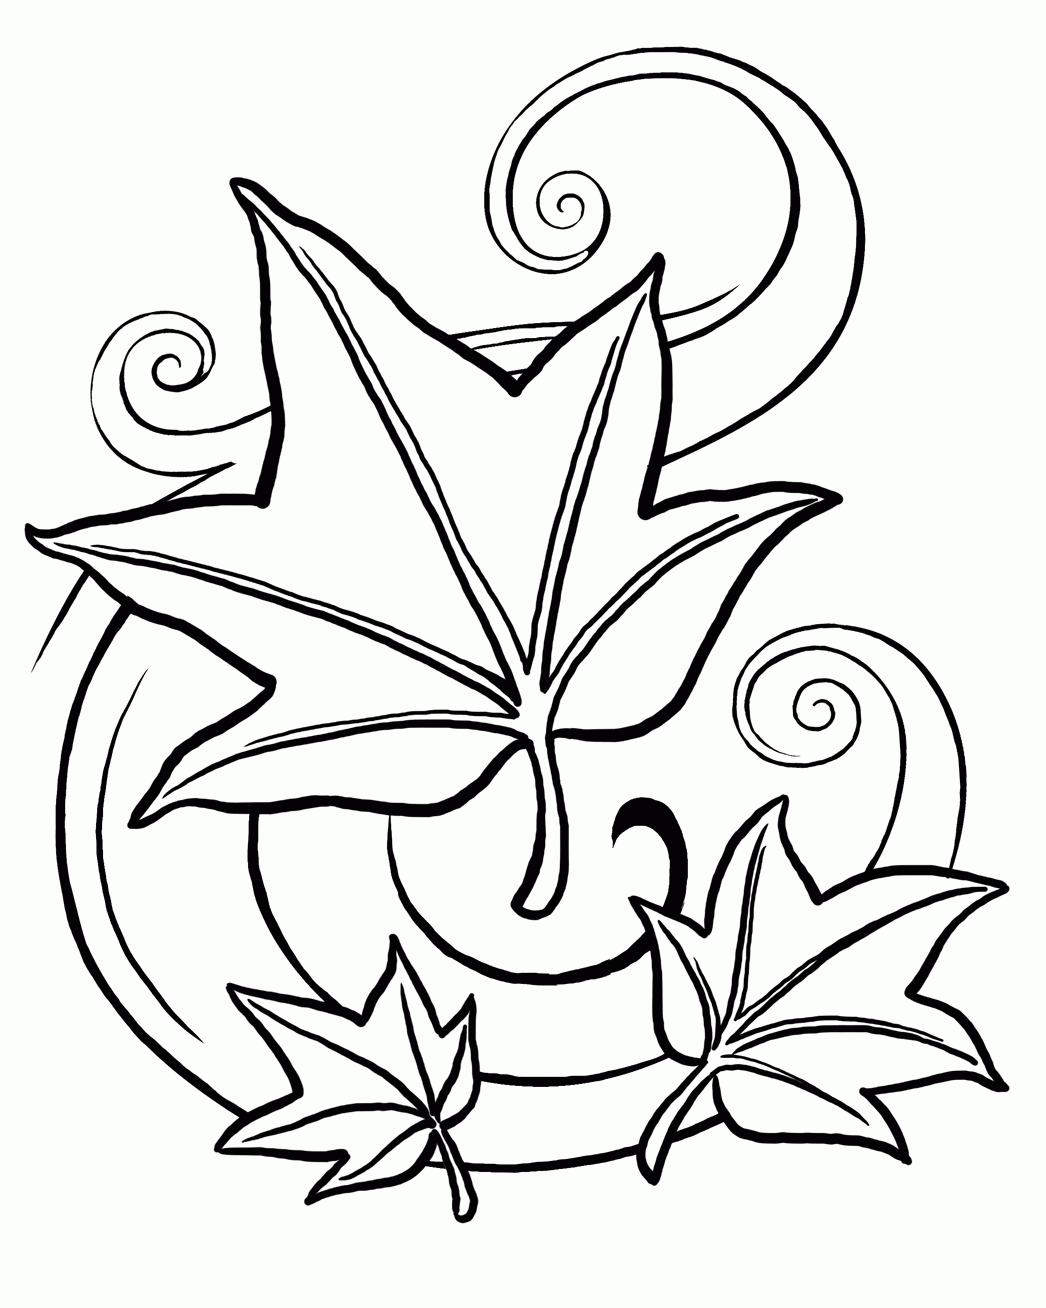 Amazing of Beautiful Pot Leaf Coloring Pages About Leaf C #2139